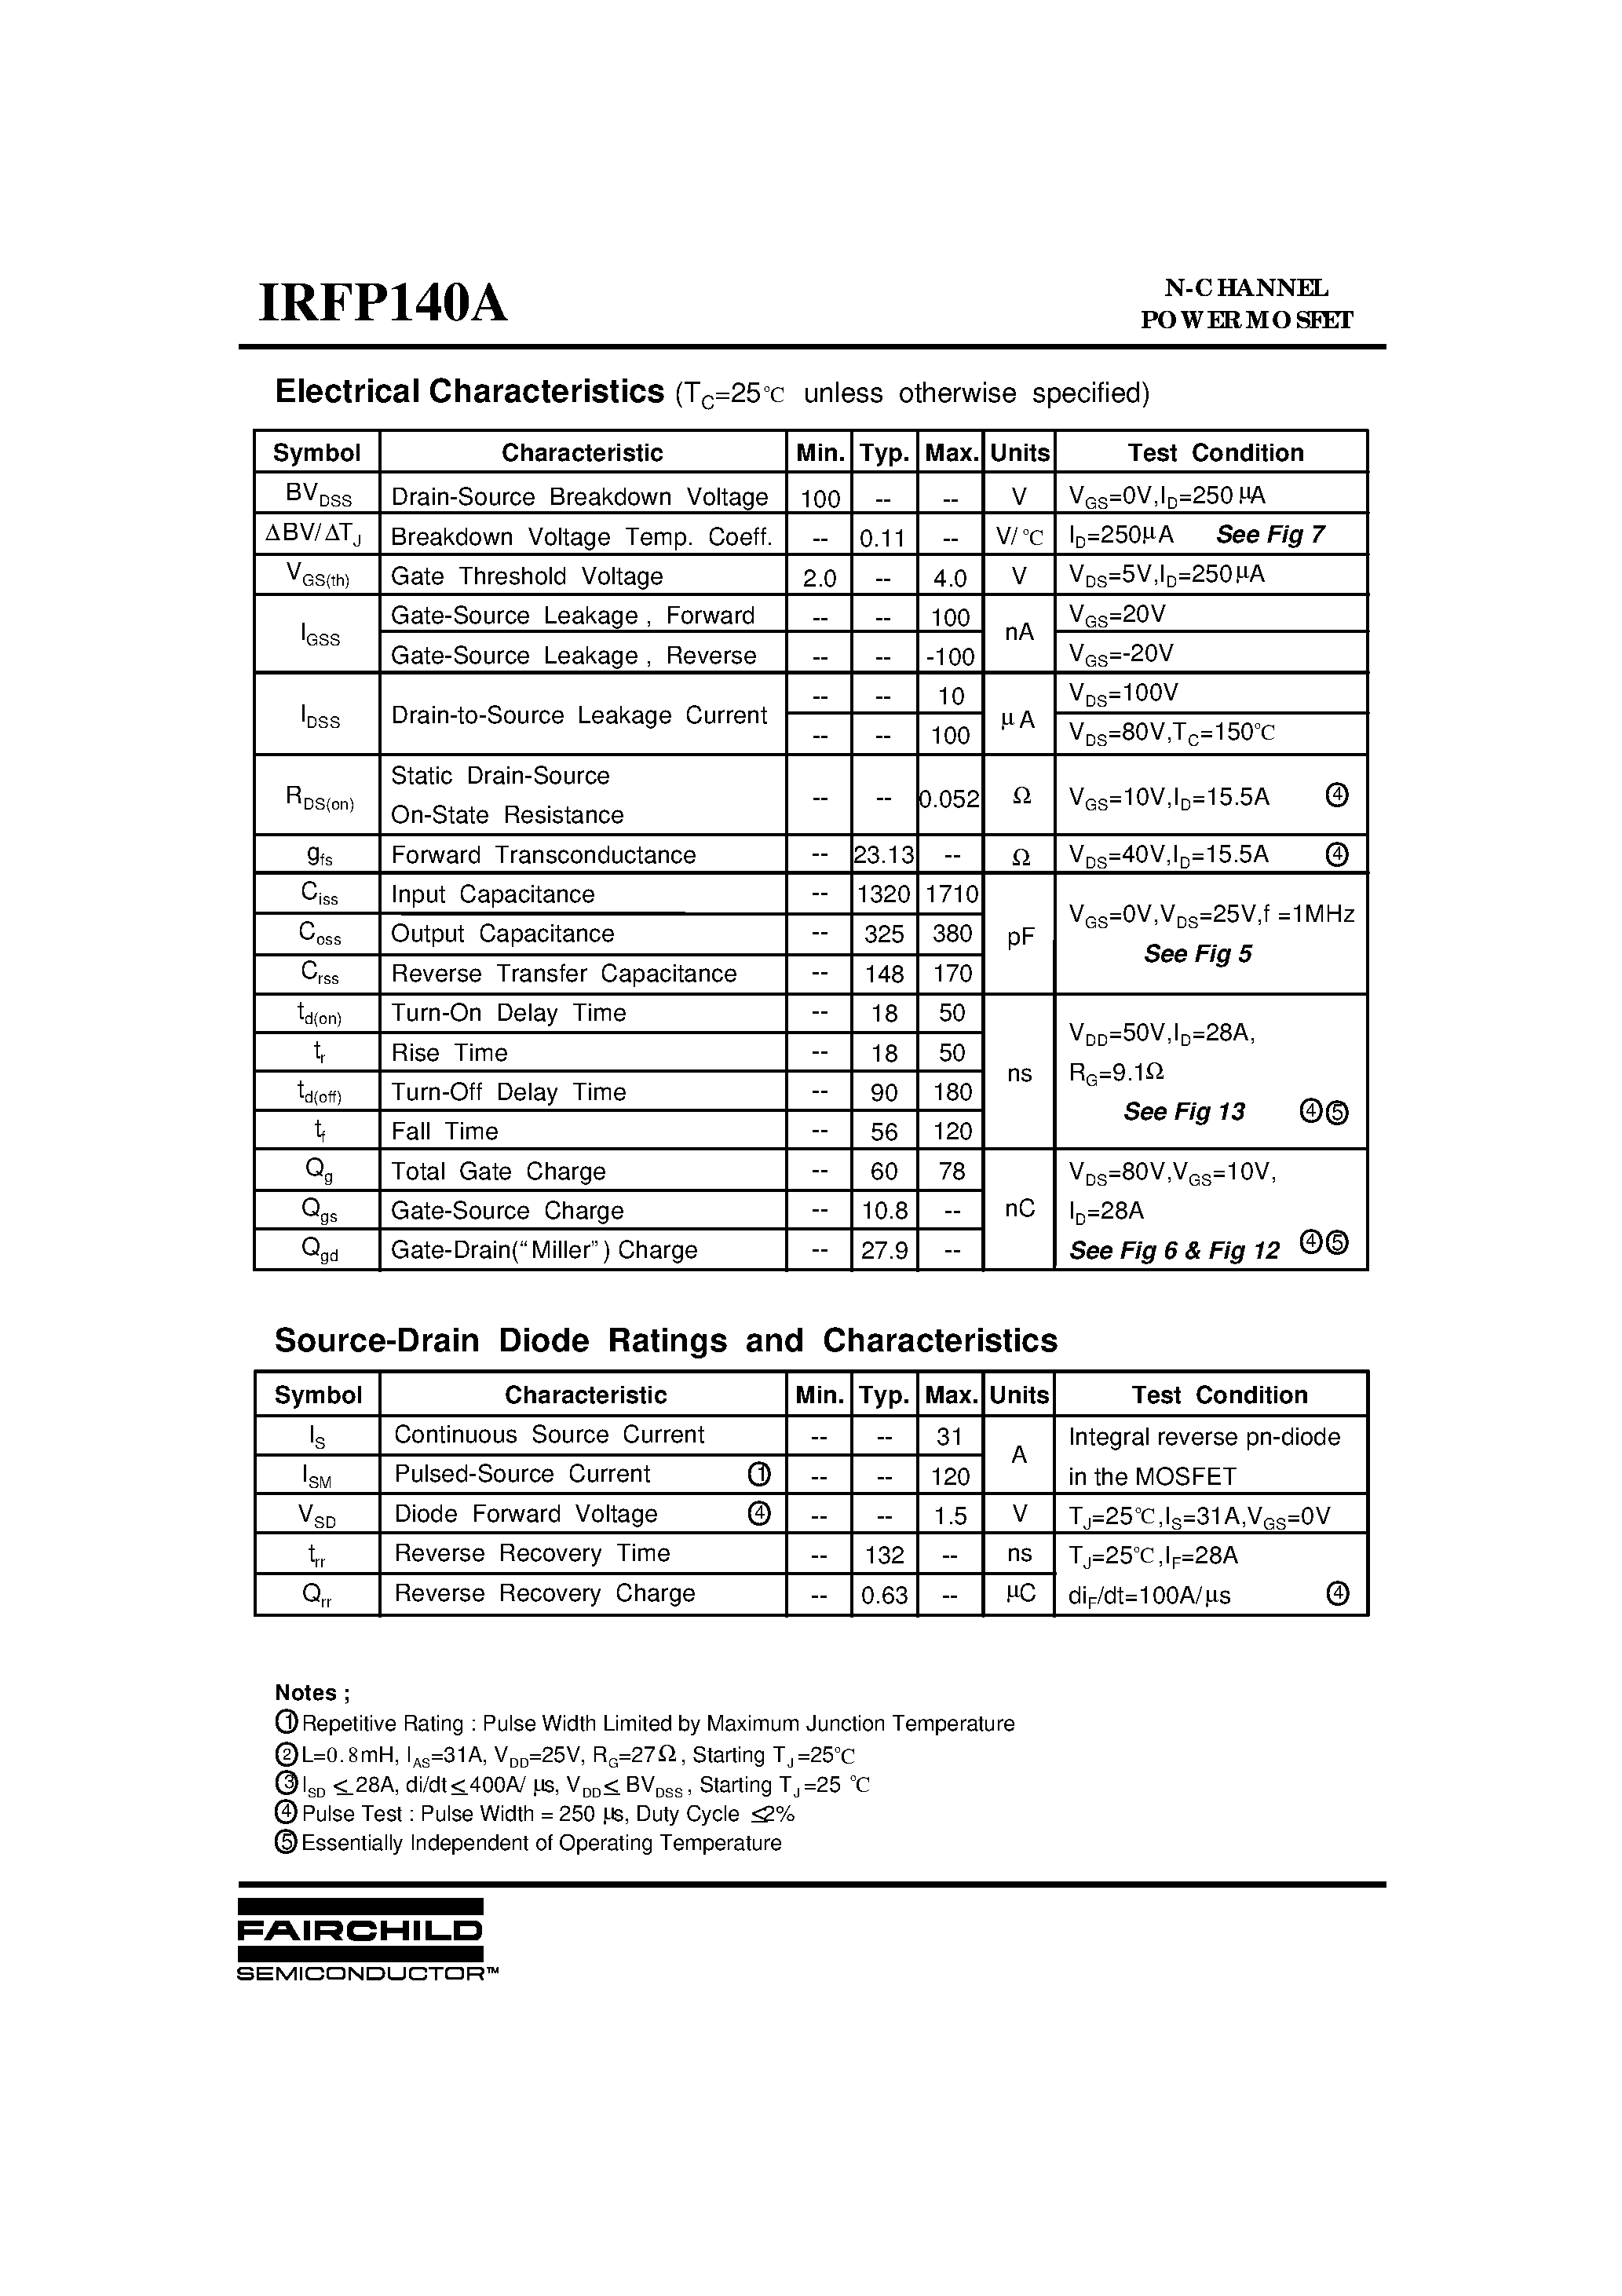 Datasheet IRFP140A - Advanced Power MOSFET page 2